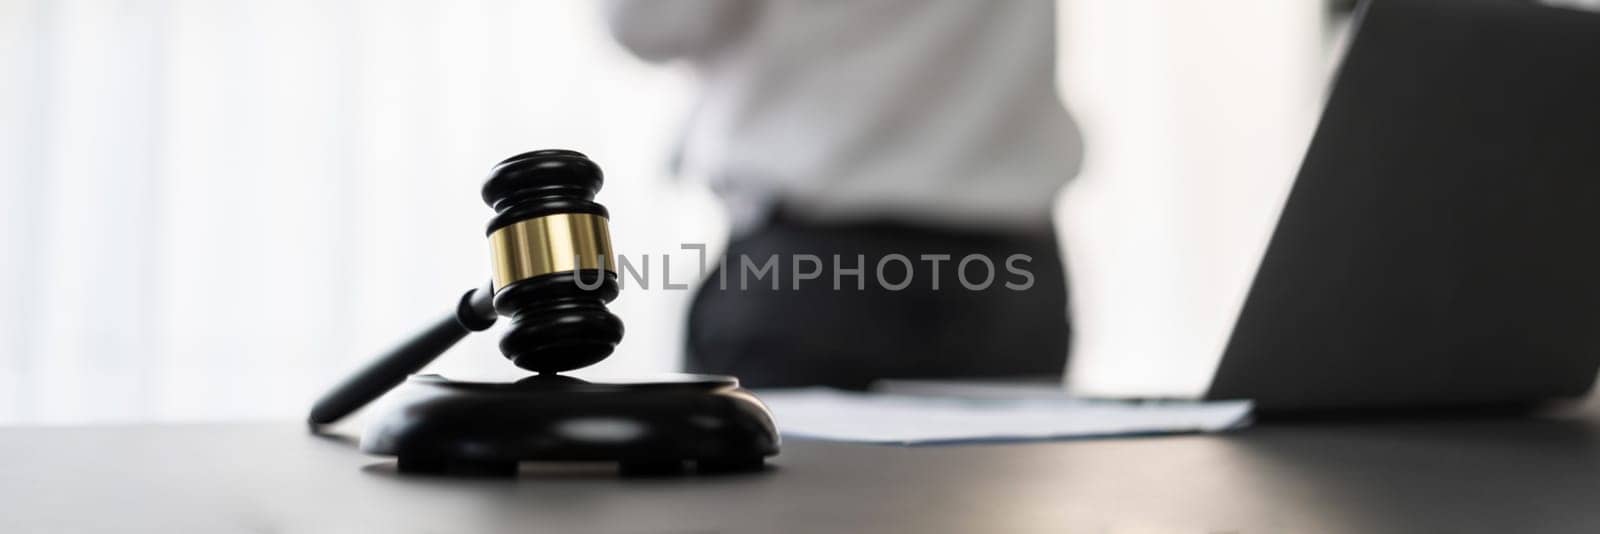 Focus wooden gavel hammer on blur background of lawyer working with legal document on desk at law firm office. Lawful hammer for righteous and equality judgment by lawmaker and attorney. Equilibrium